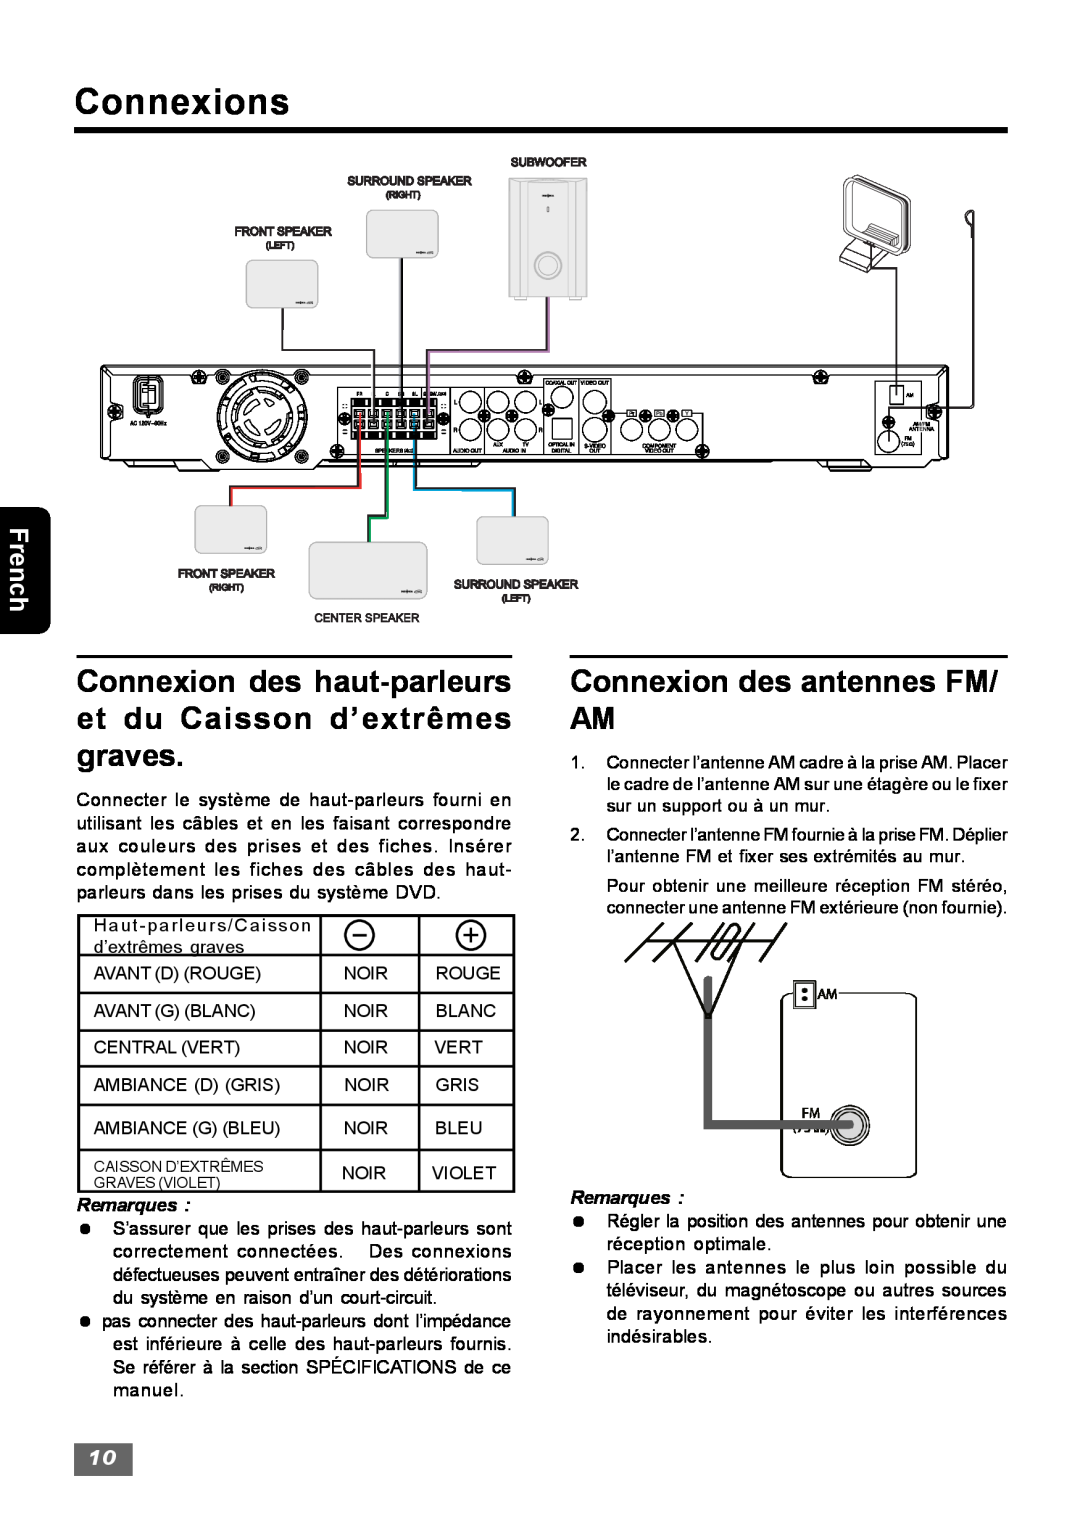 Insignia IS-HTIB102731 owner manual Connexion des antennes FM AM, Connexions, French 